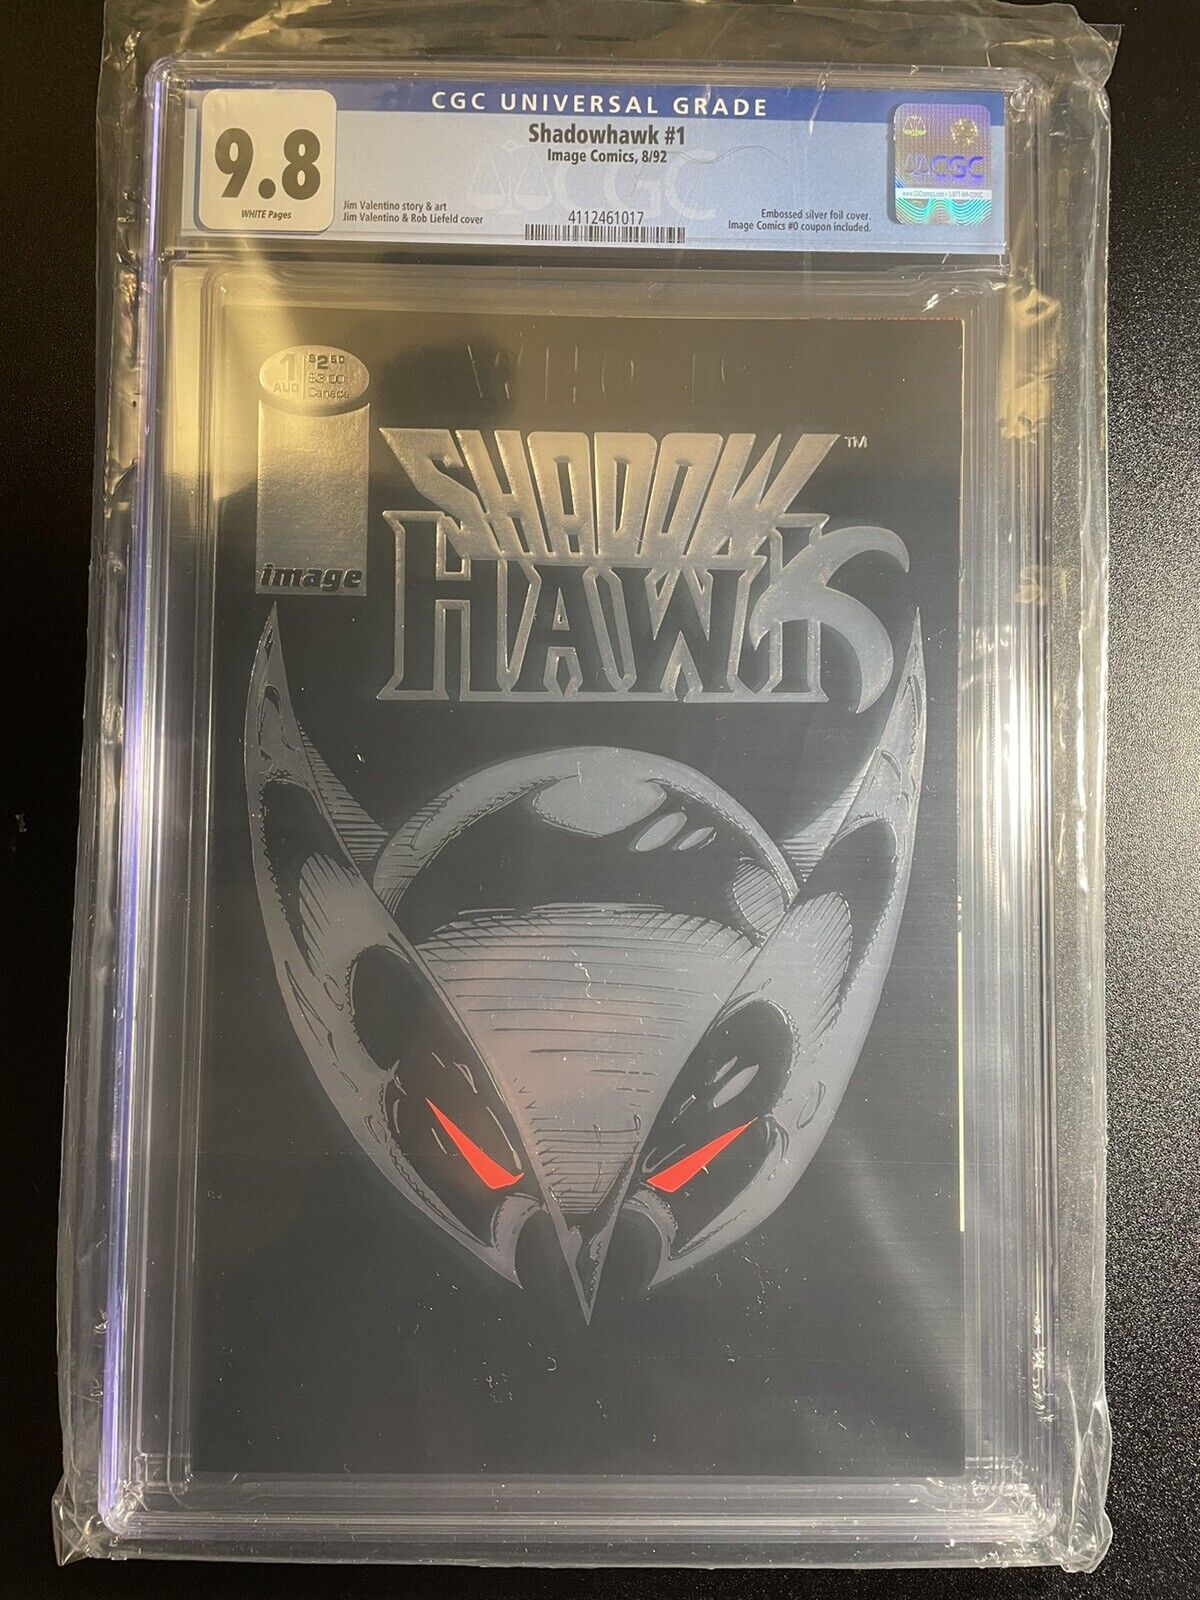 Shadowhawk #1 CGC 9.8 Image 1992 Valentino embossed foil cover